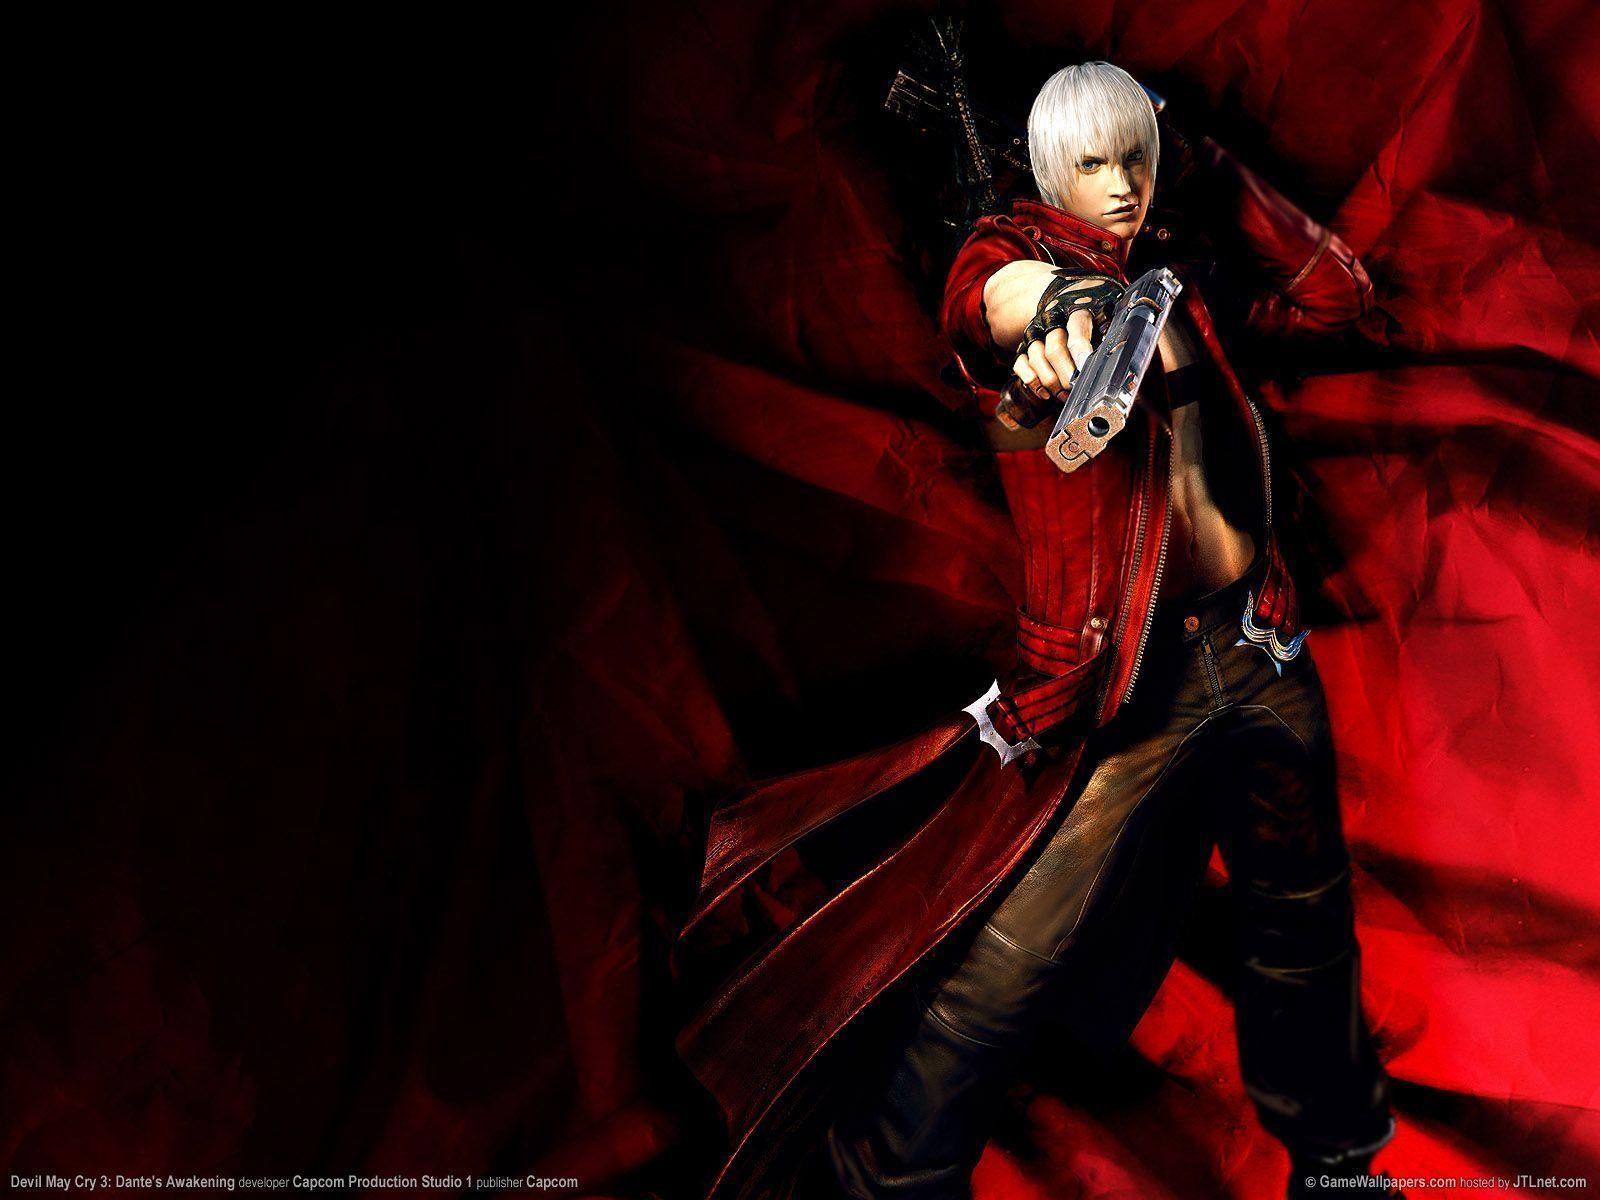 Devil May Cry 3 wallpaper. Devil May Cry 3